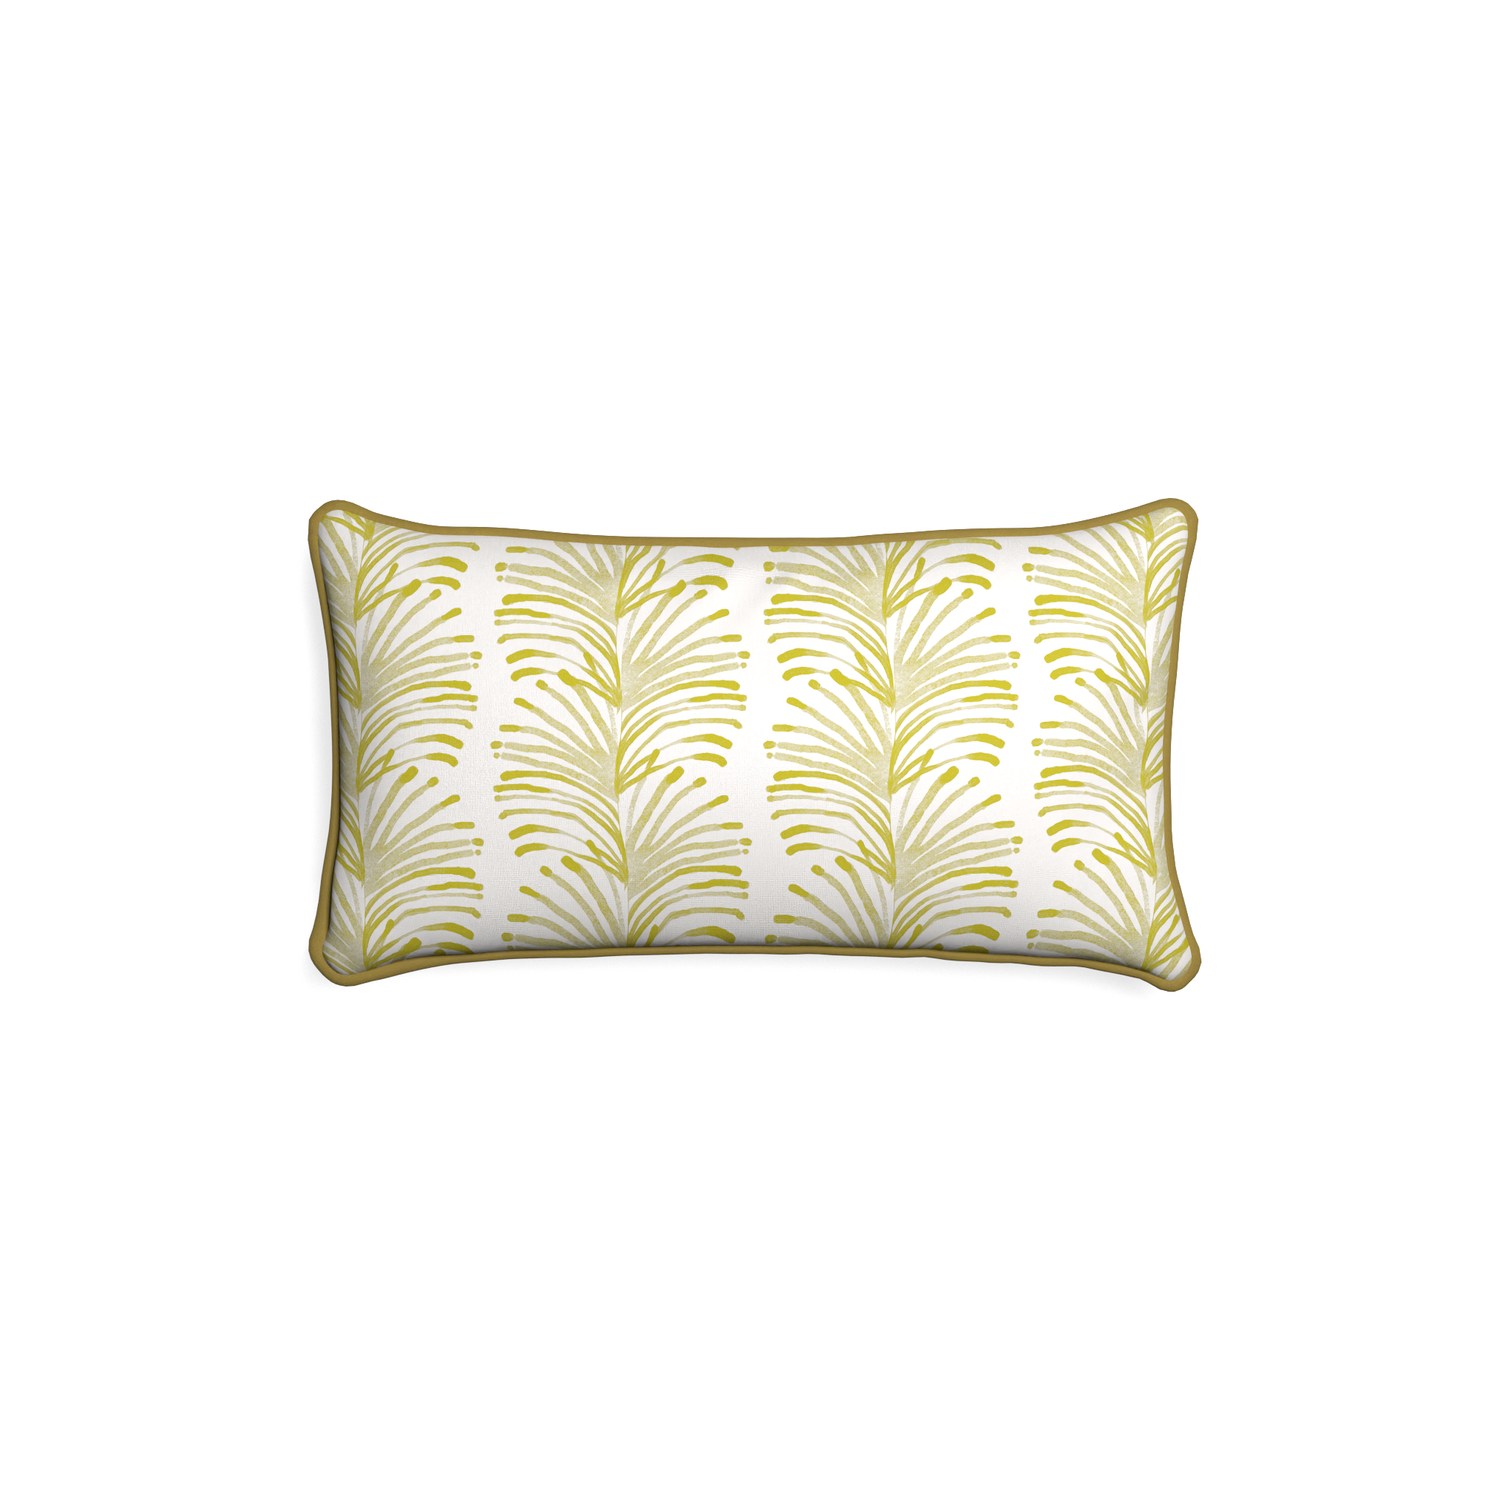 Petite-lumbar emma chartreuse custom yellow stripe chartreusepillow with c piping on white background